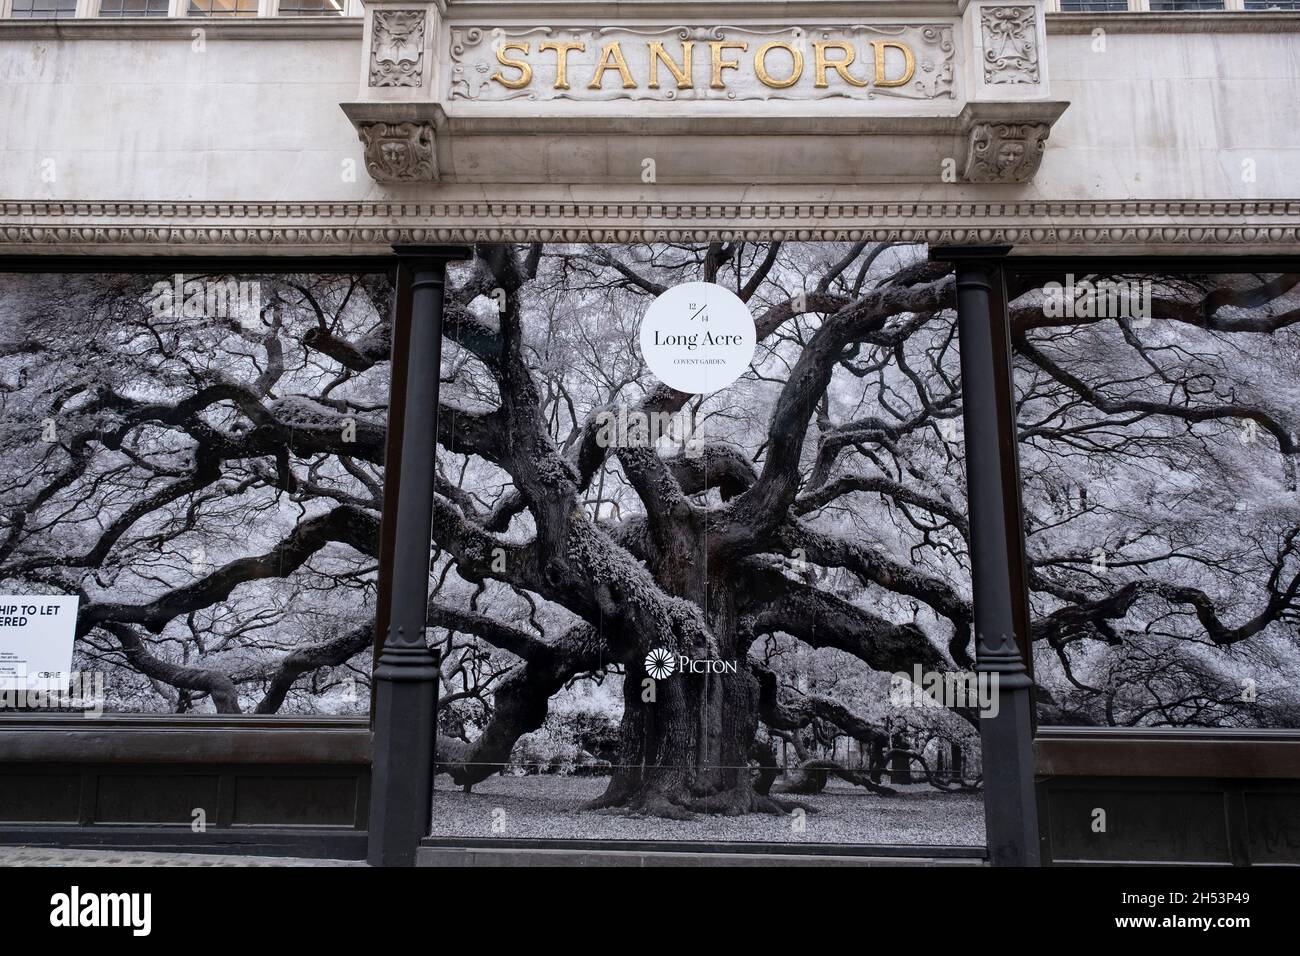 Tree photograph covers the old shop front to Stanfords map shop on 19th October 2021 in London, United Kingdom. Stanfords is a specialist bookshop of maps and travel books in London, established in 1853 by Edward Stanford. Its collection of maps, globes, and maritime charts is considered the worlds largest. In 2018 Stanfords opened a new location at 7 Mercer Walk in Covent Garden. Stock Photo